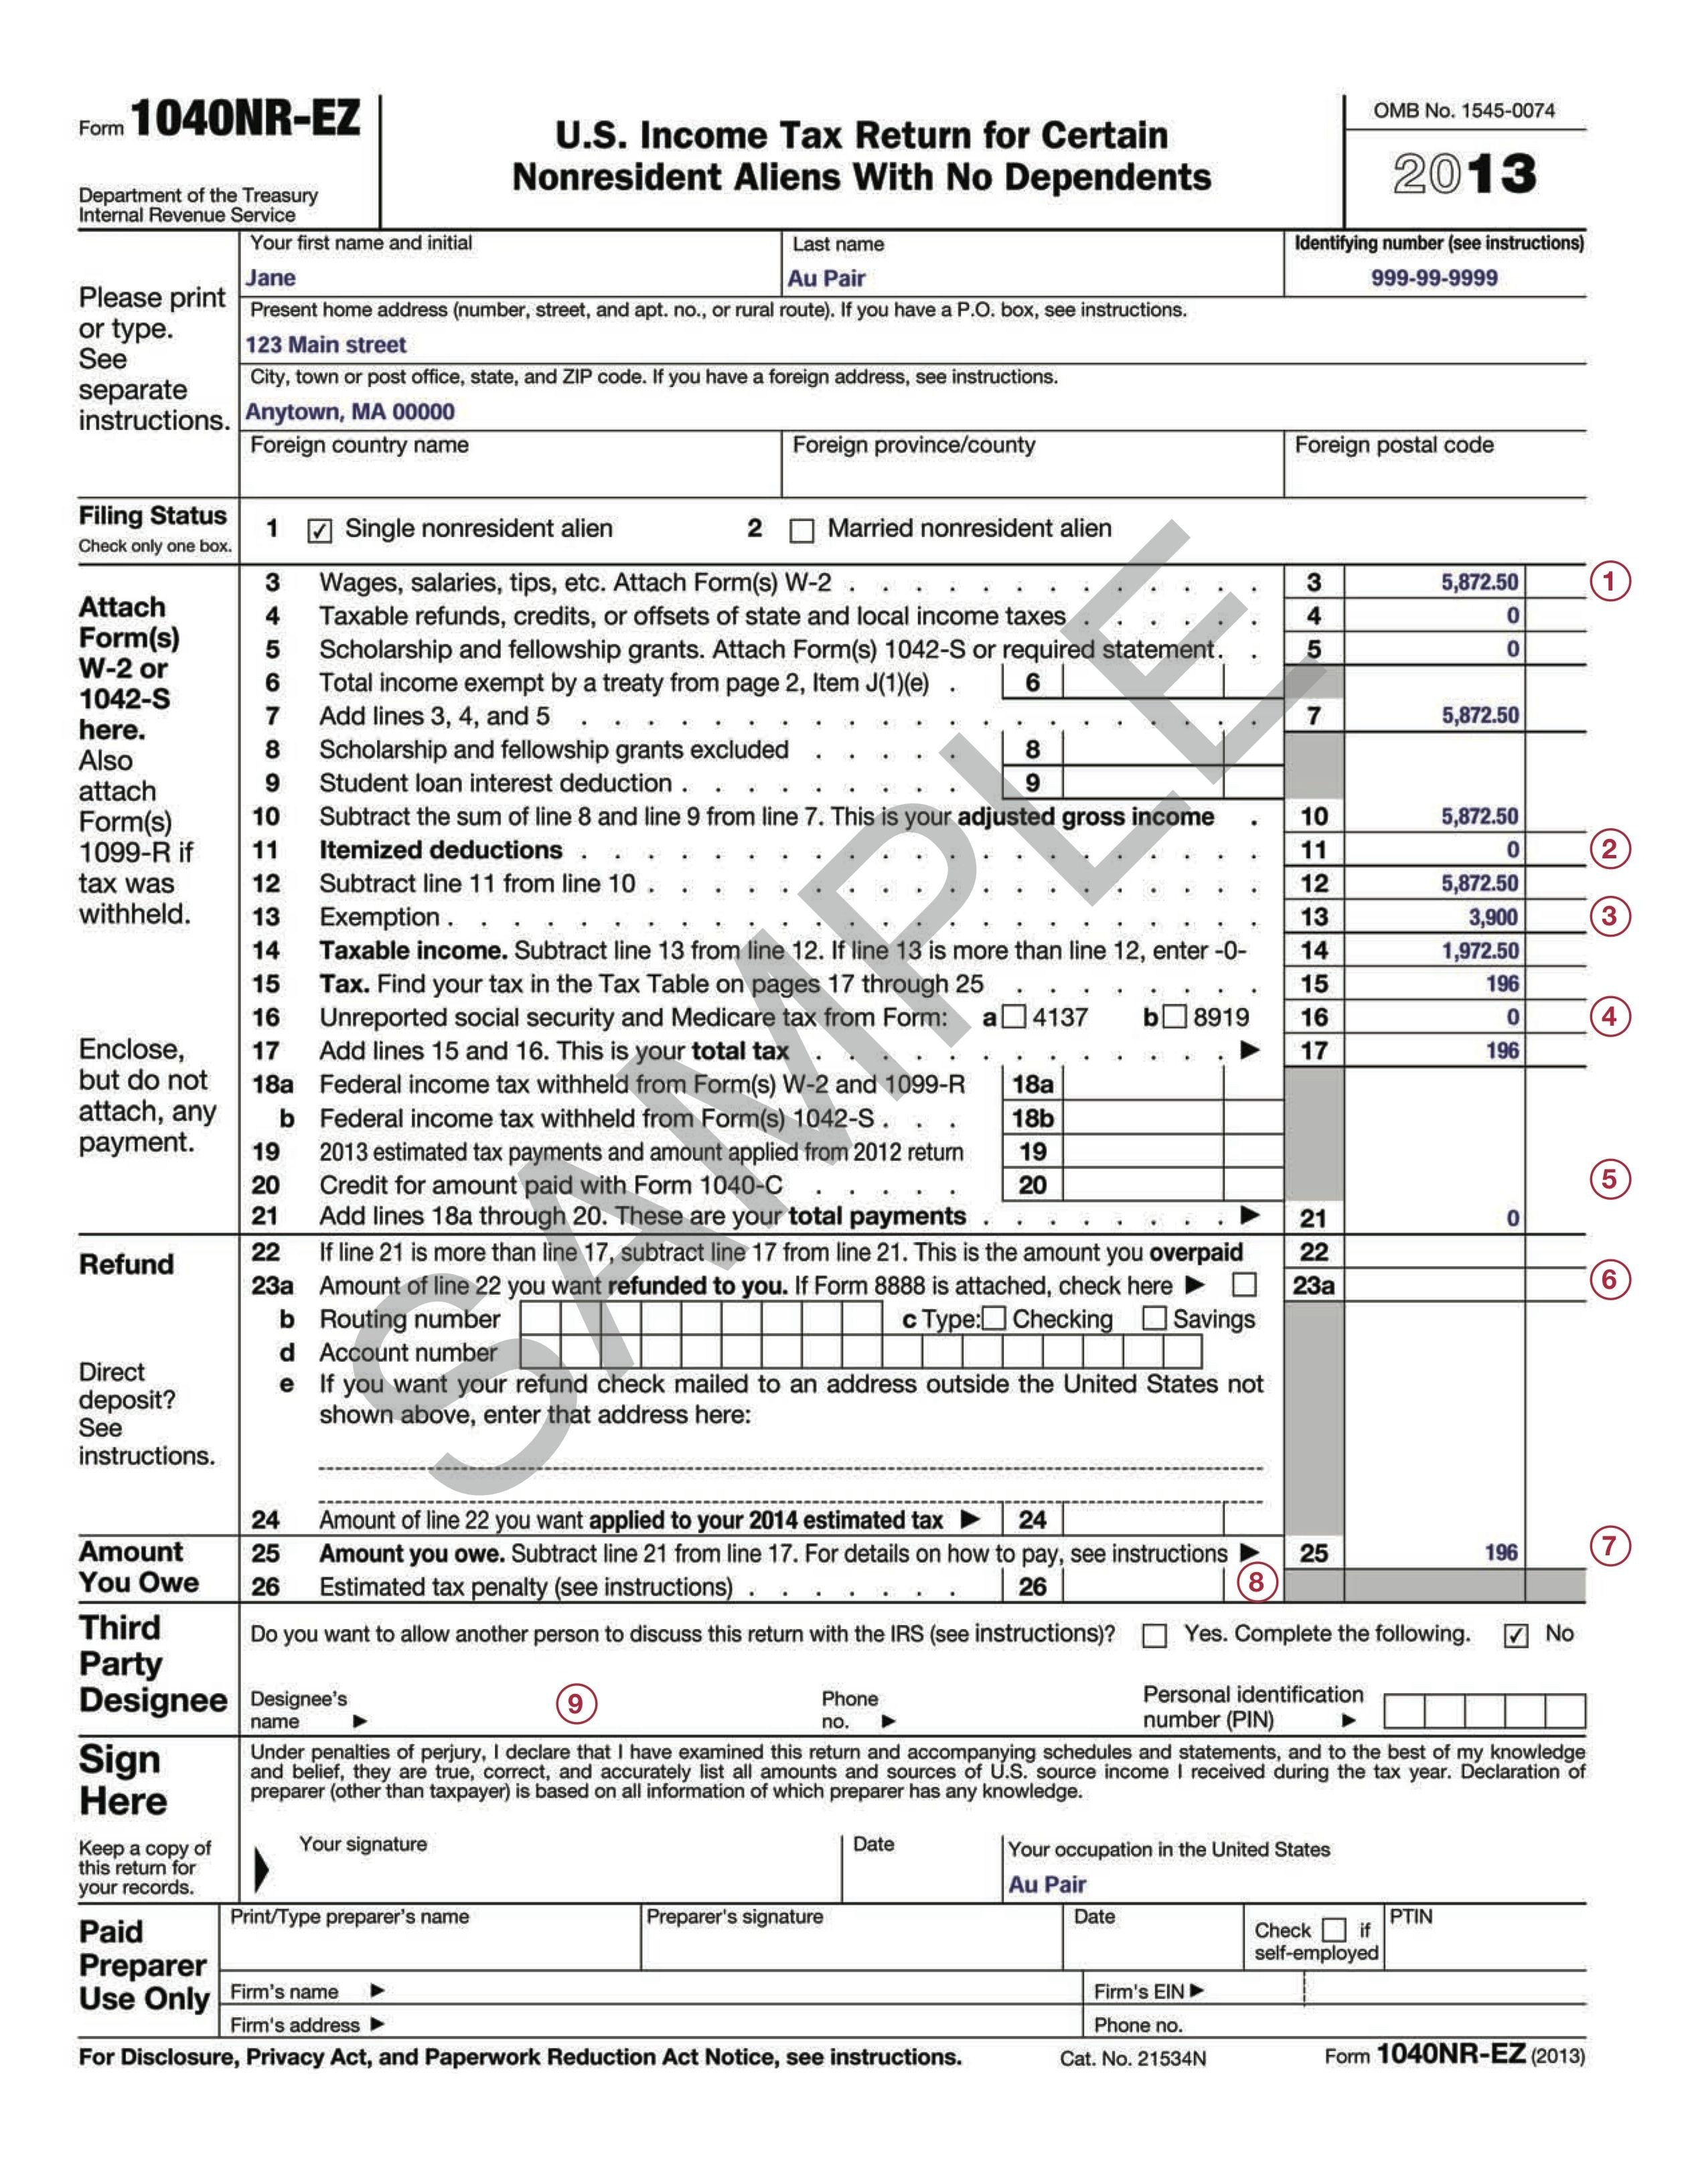 1099 Misc Fillable Form 2017 Lovely Printable 1099 Tax Form New 2017 - Free 1099 Form 2013 Printable